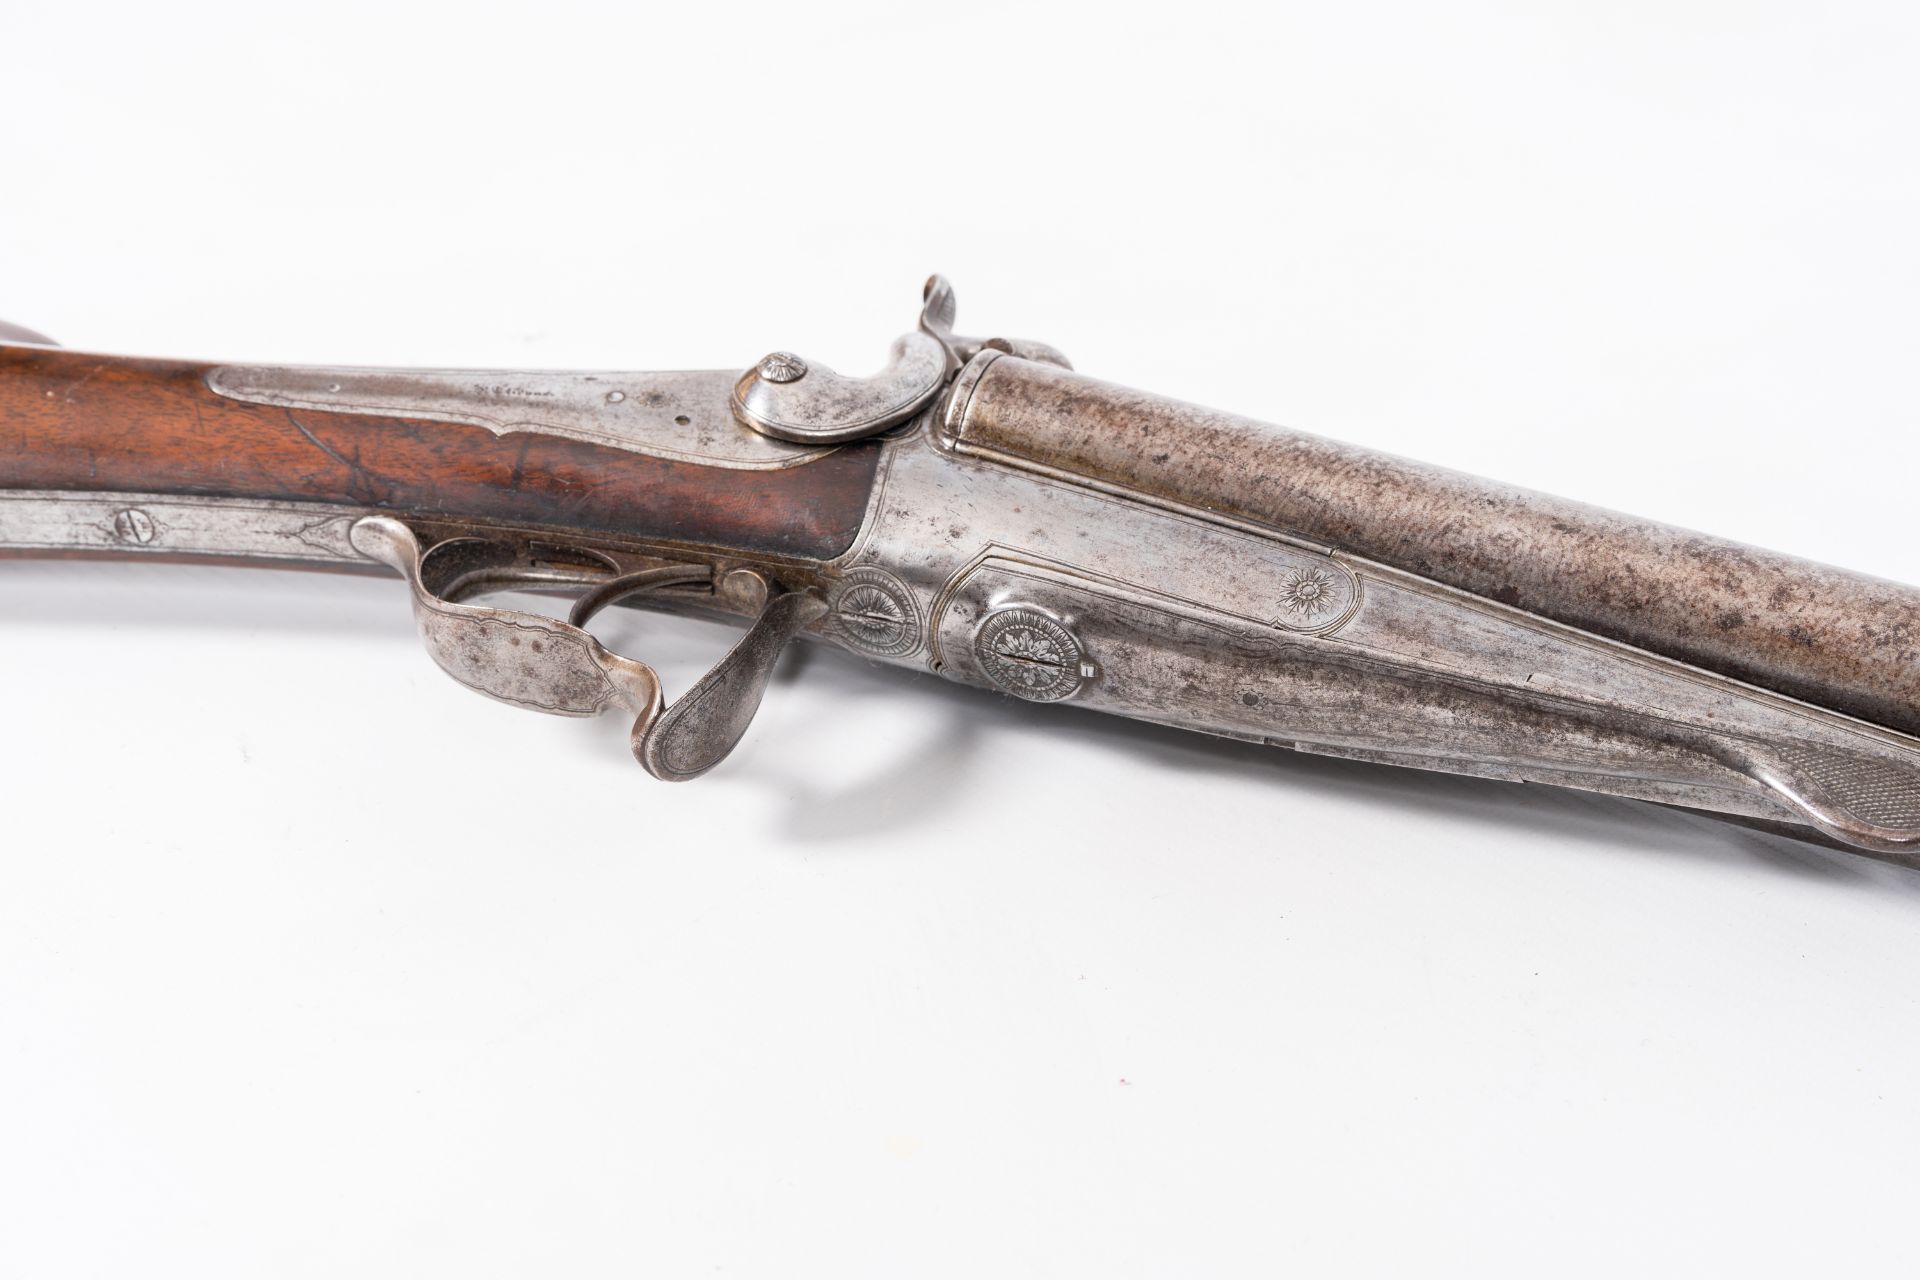 A French double barrel pinfire shotgun with a damask barrel, marked Pondevaux - St. Etienne, 19th C. - Image 4 of 6